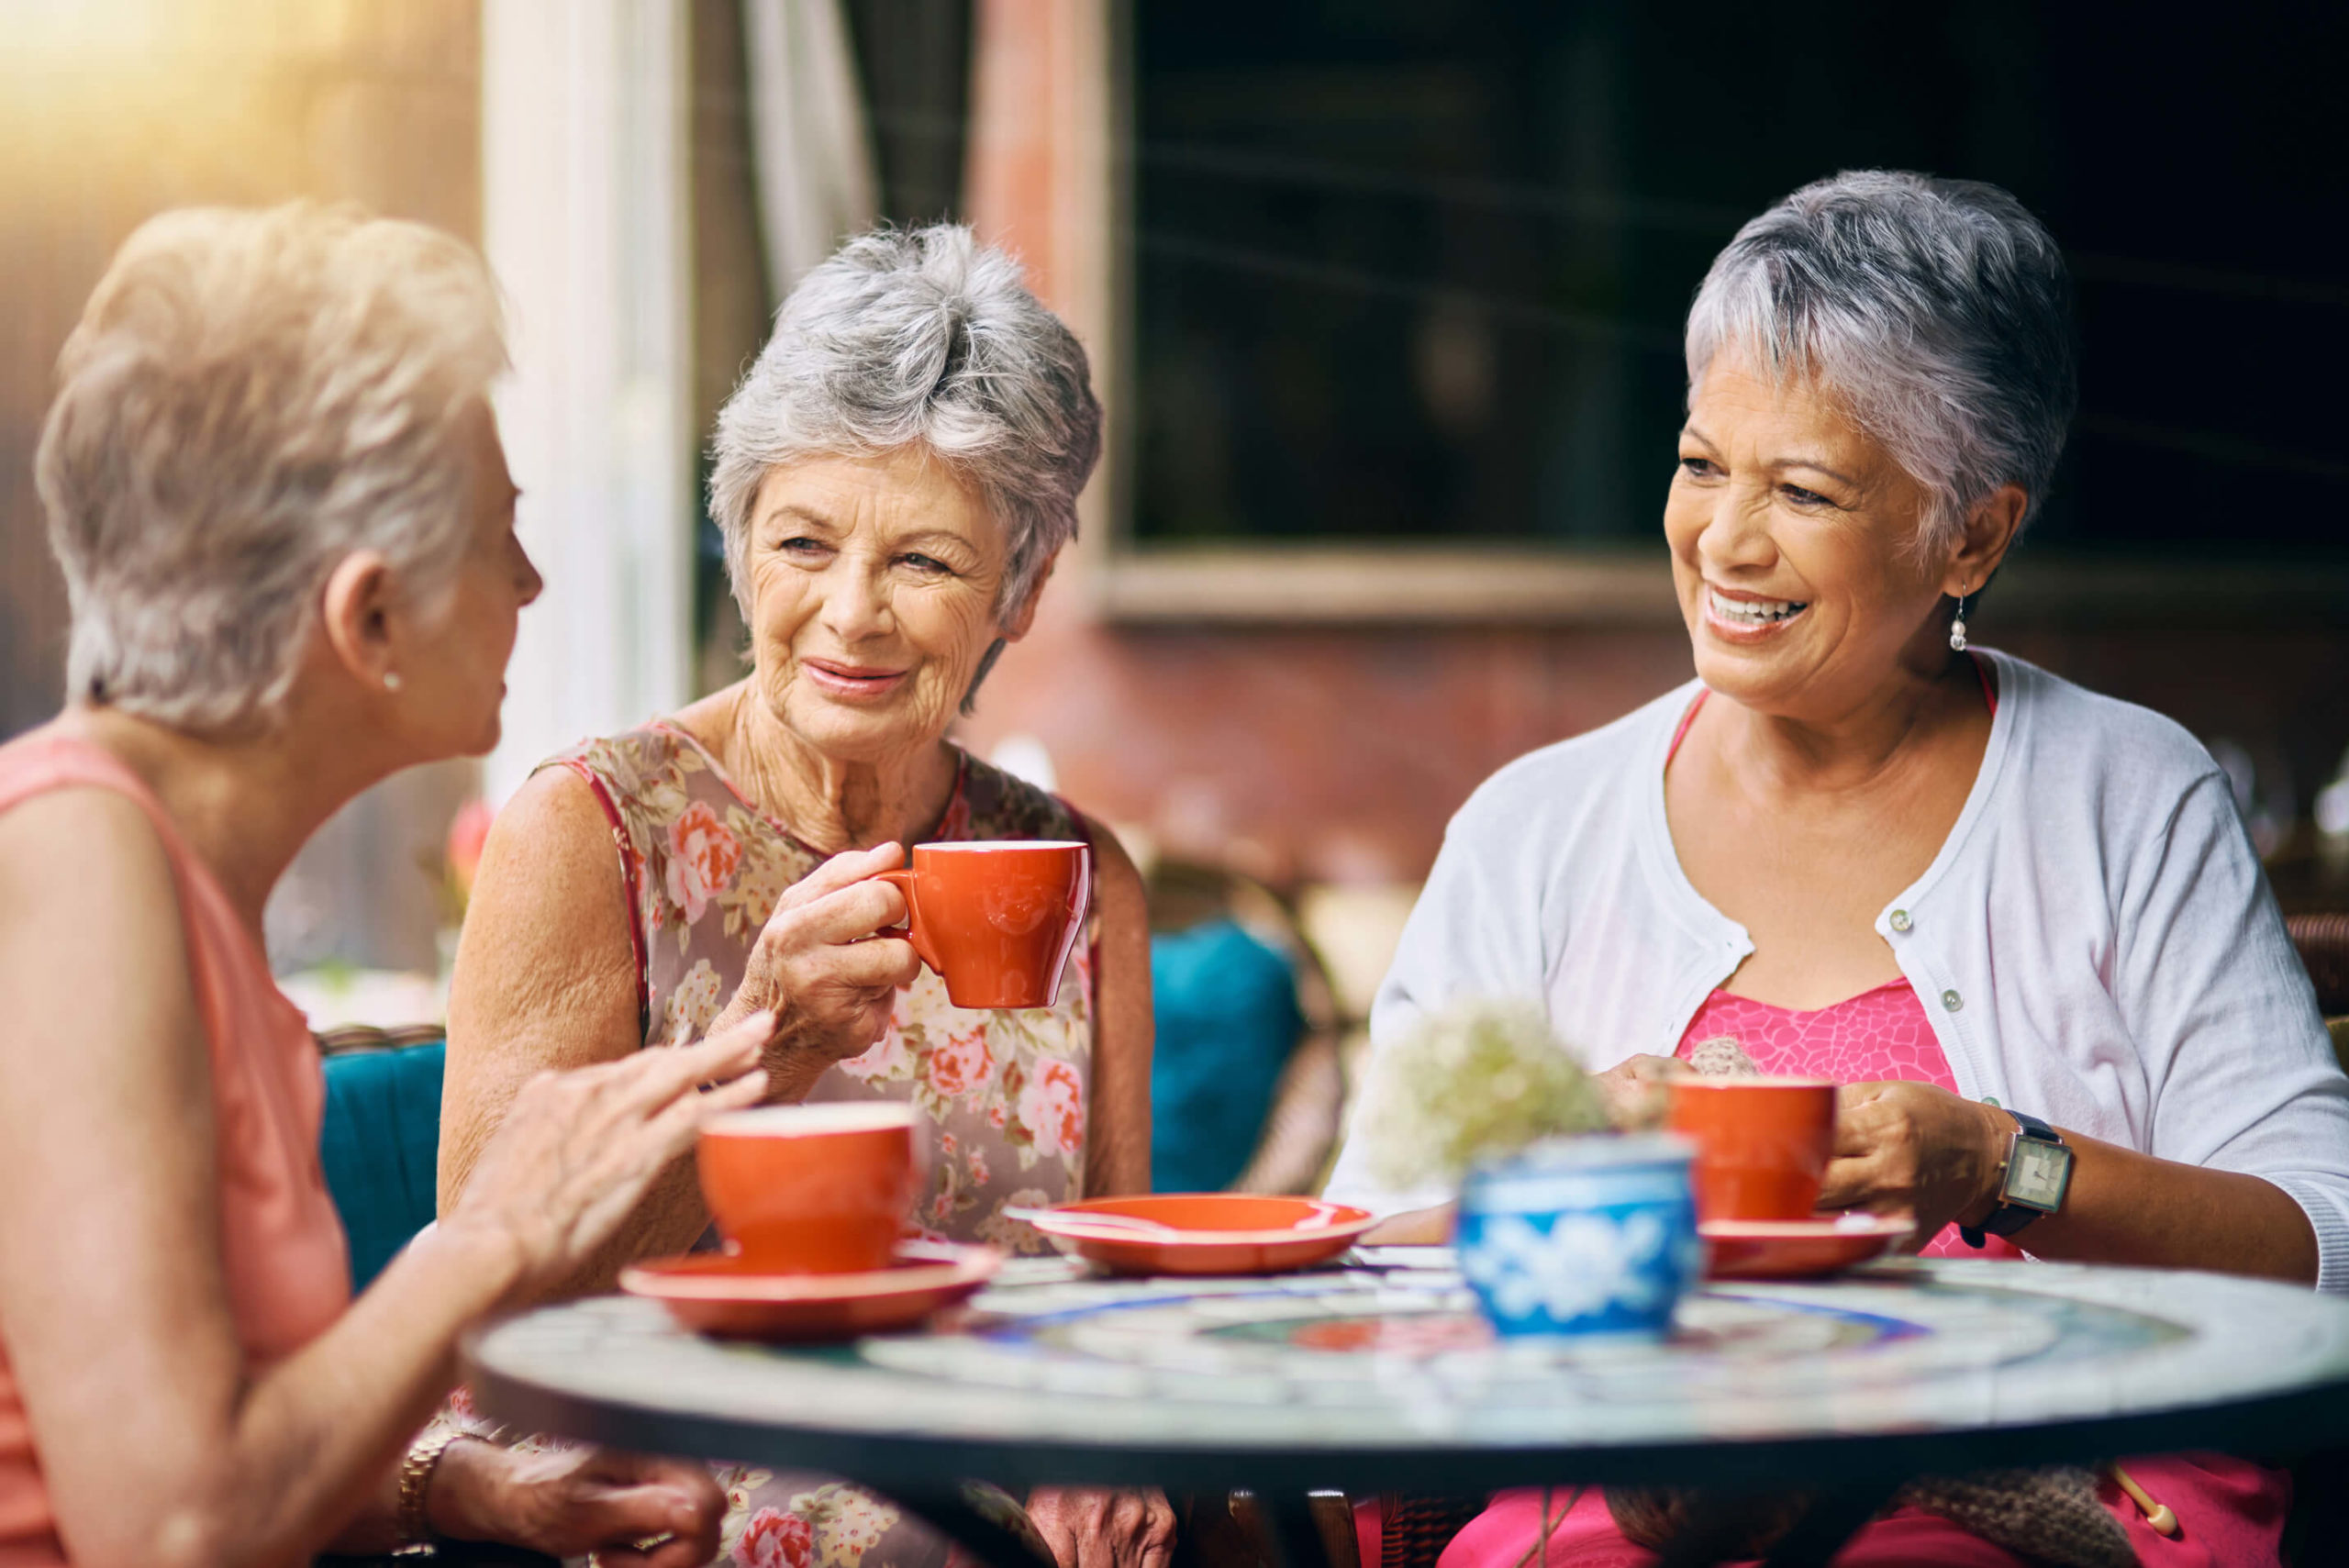 Elderly residents socializing at a table, holding colorful tea cups while engaged in conversation.